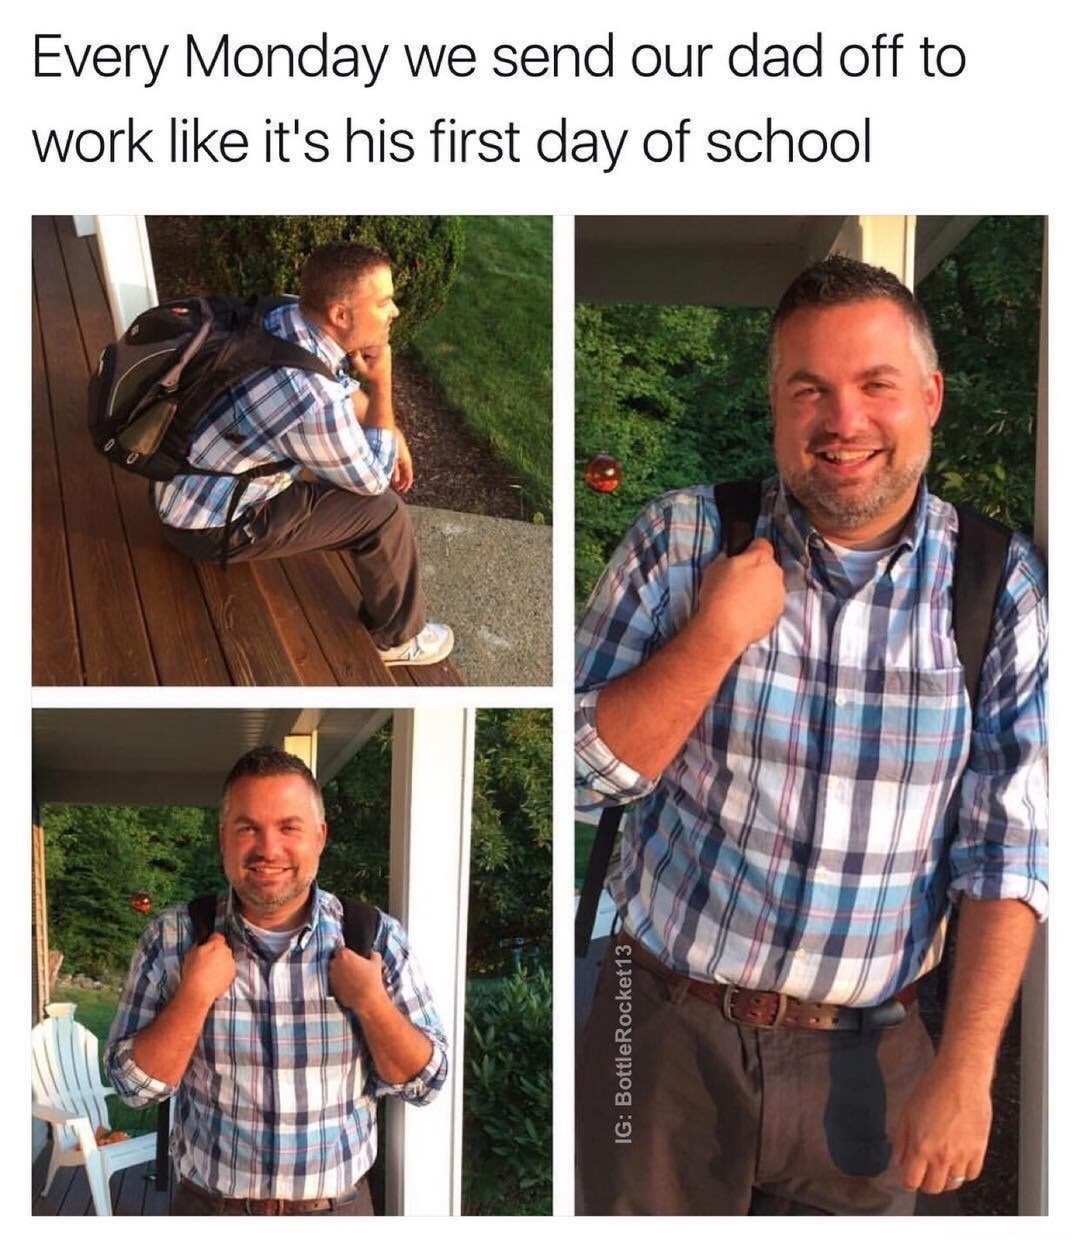 Meme about dad that is dressed as if it is first day of school every Monday.